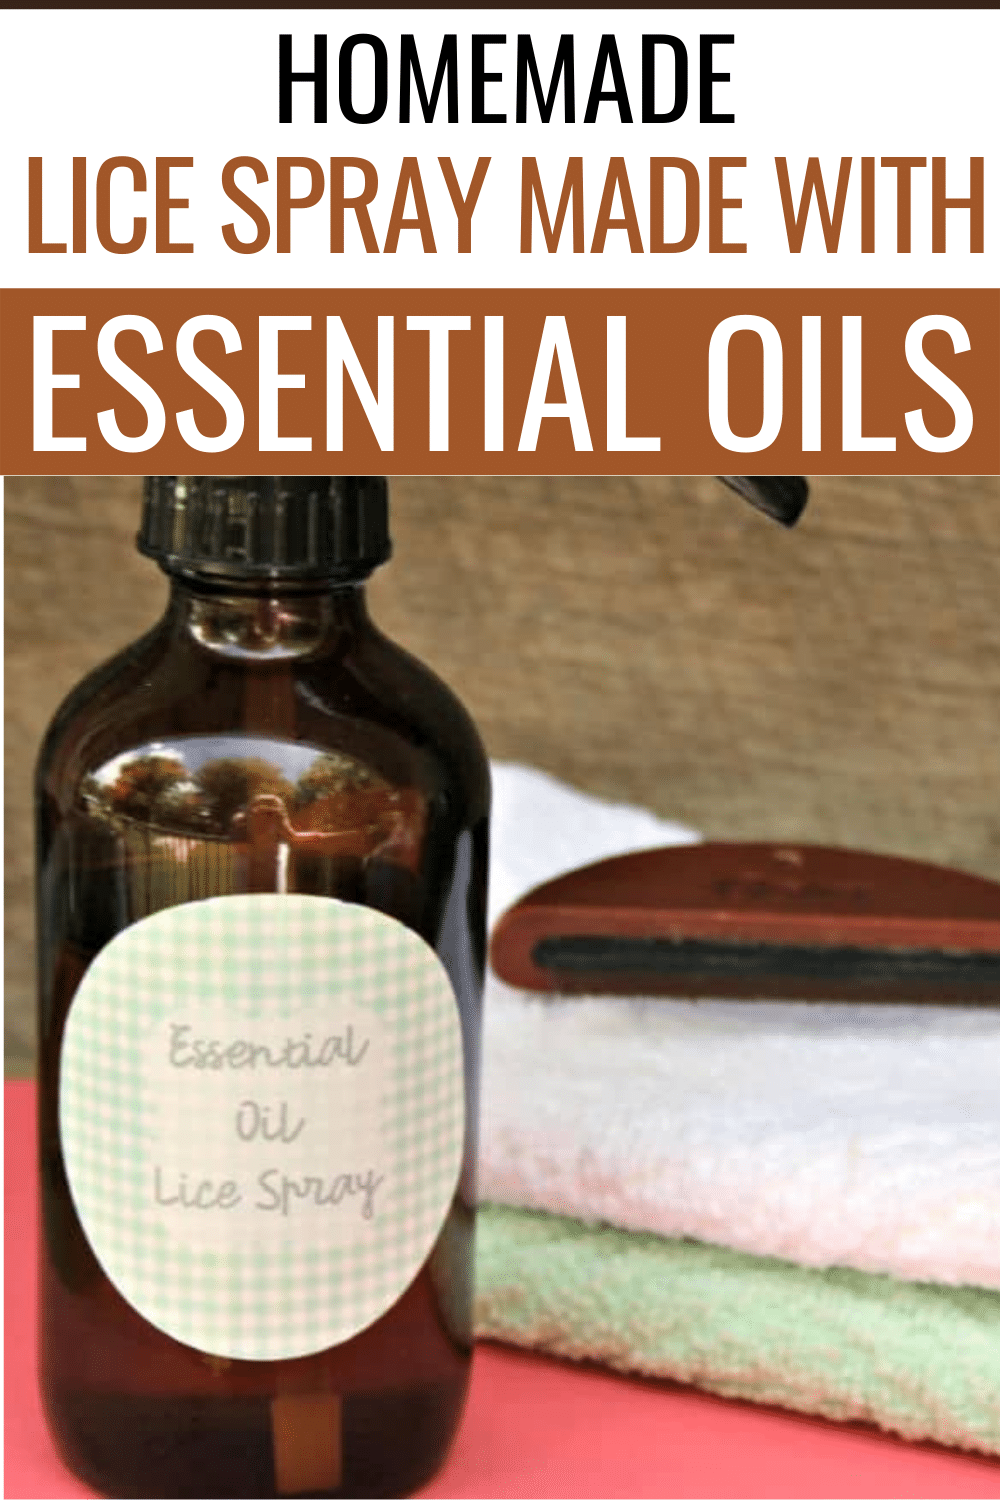 Homemade lice spray is easy to make and contains essential oils that may help prevent a head lice infestation. This is easy to use as a lice shampoo. #lice #essentialoilrecipes #homemadelicespray via @wondermomwannab